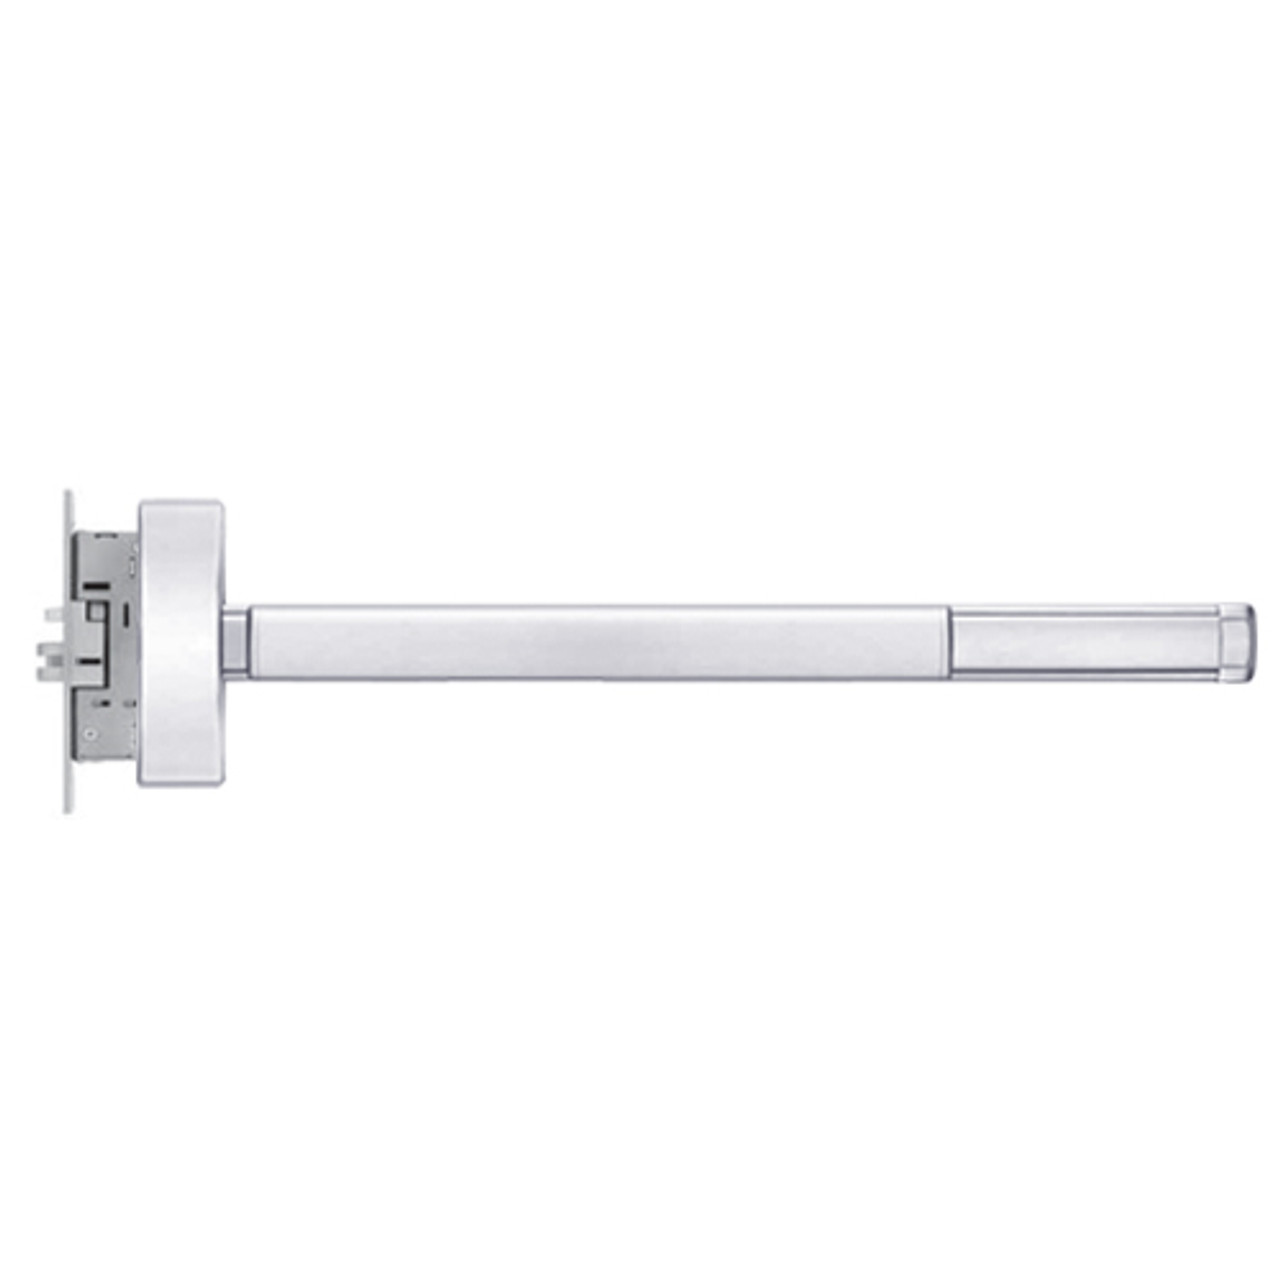 MLRFL2302-LHR-625-48 PHI 2300 Series Fire Rated Apex Mortise Exit Device with Motorized Latch Retraction Prepped for Dummy Trim in Bright Chrome Finish